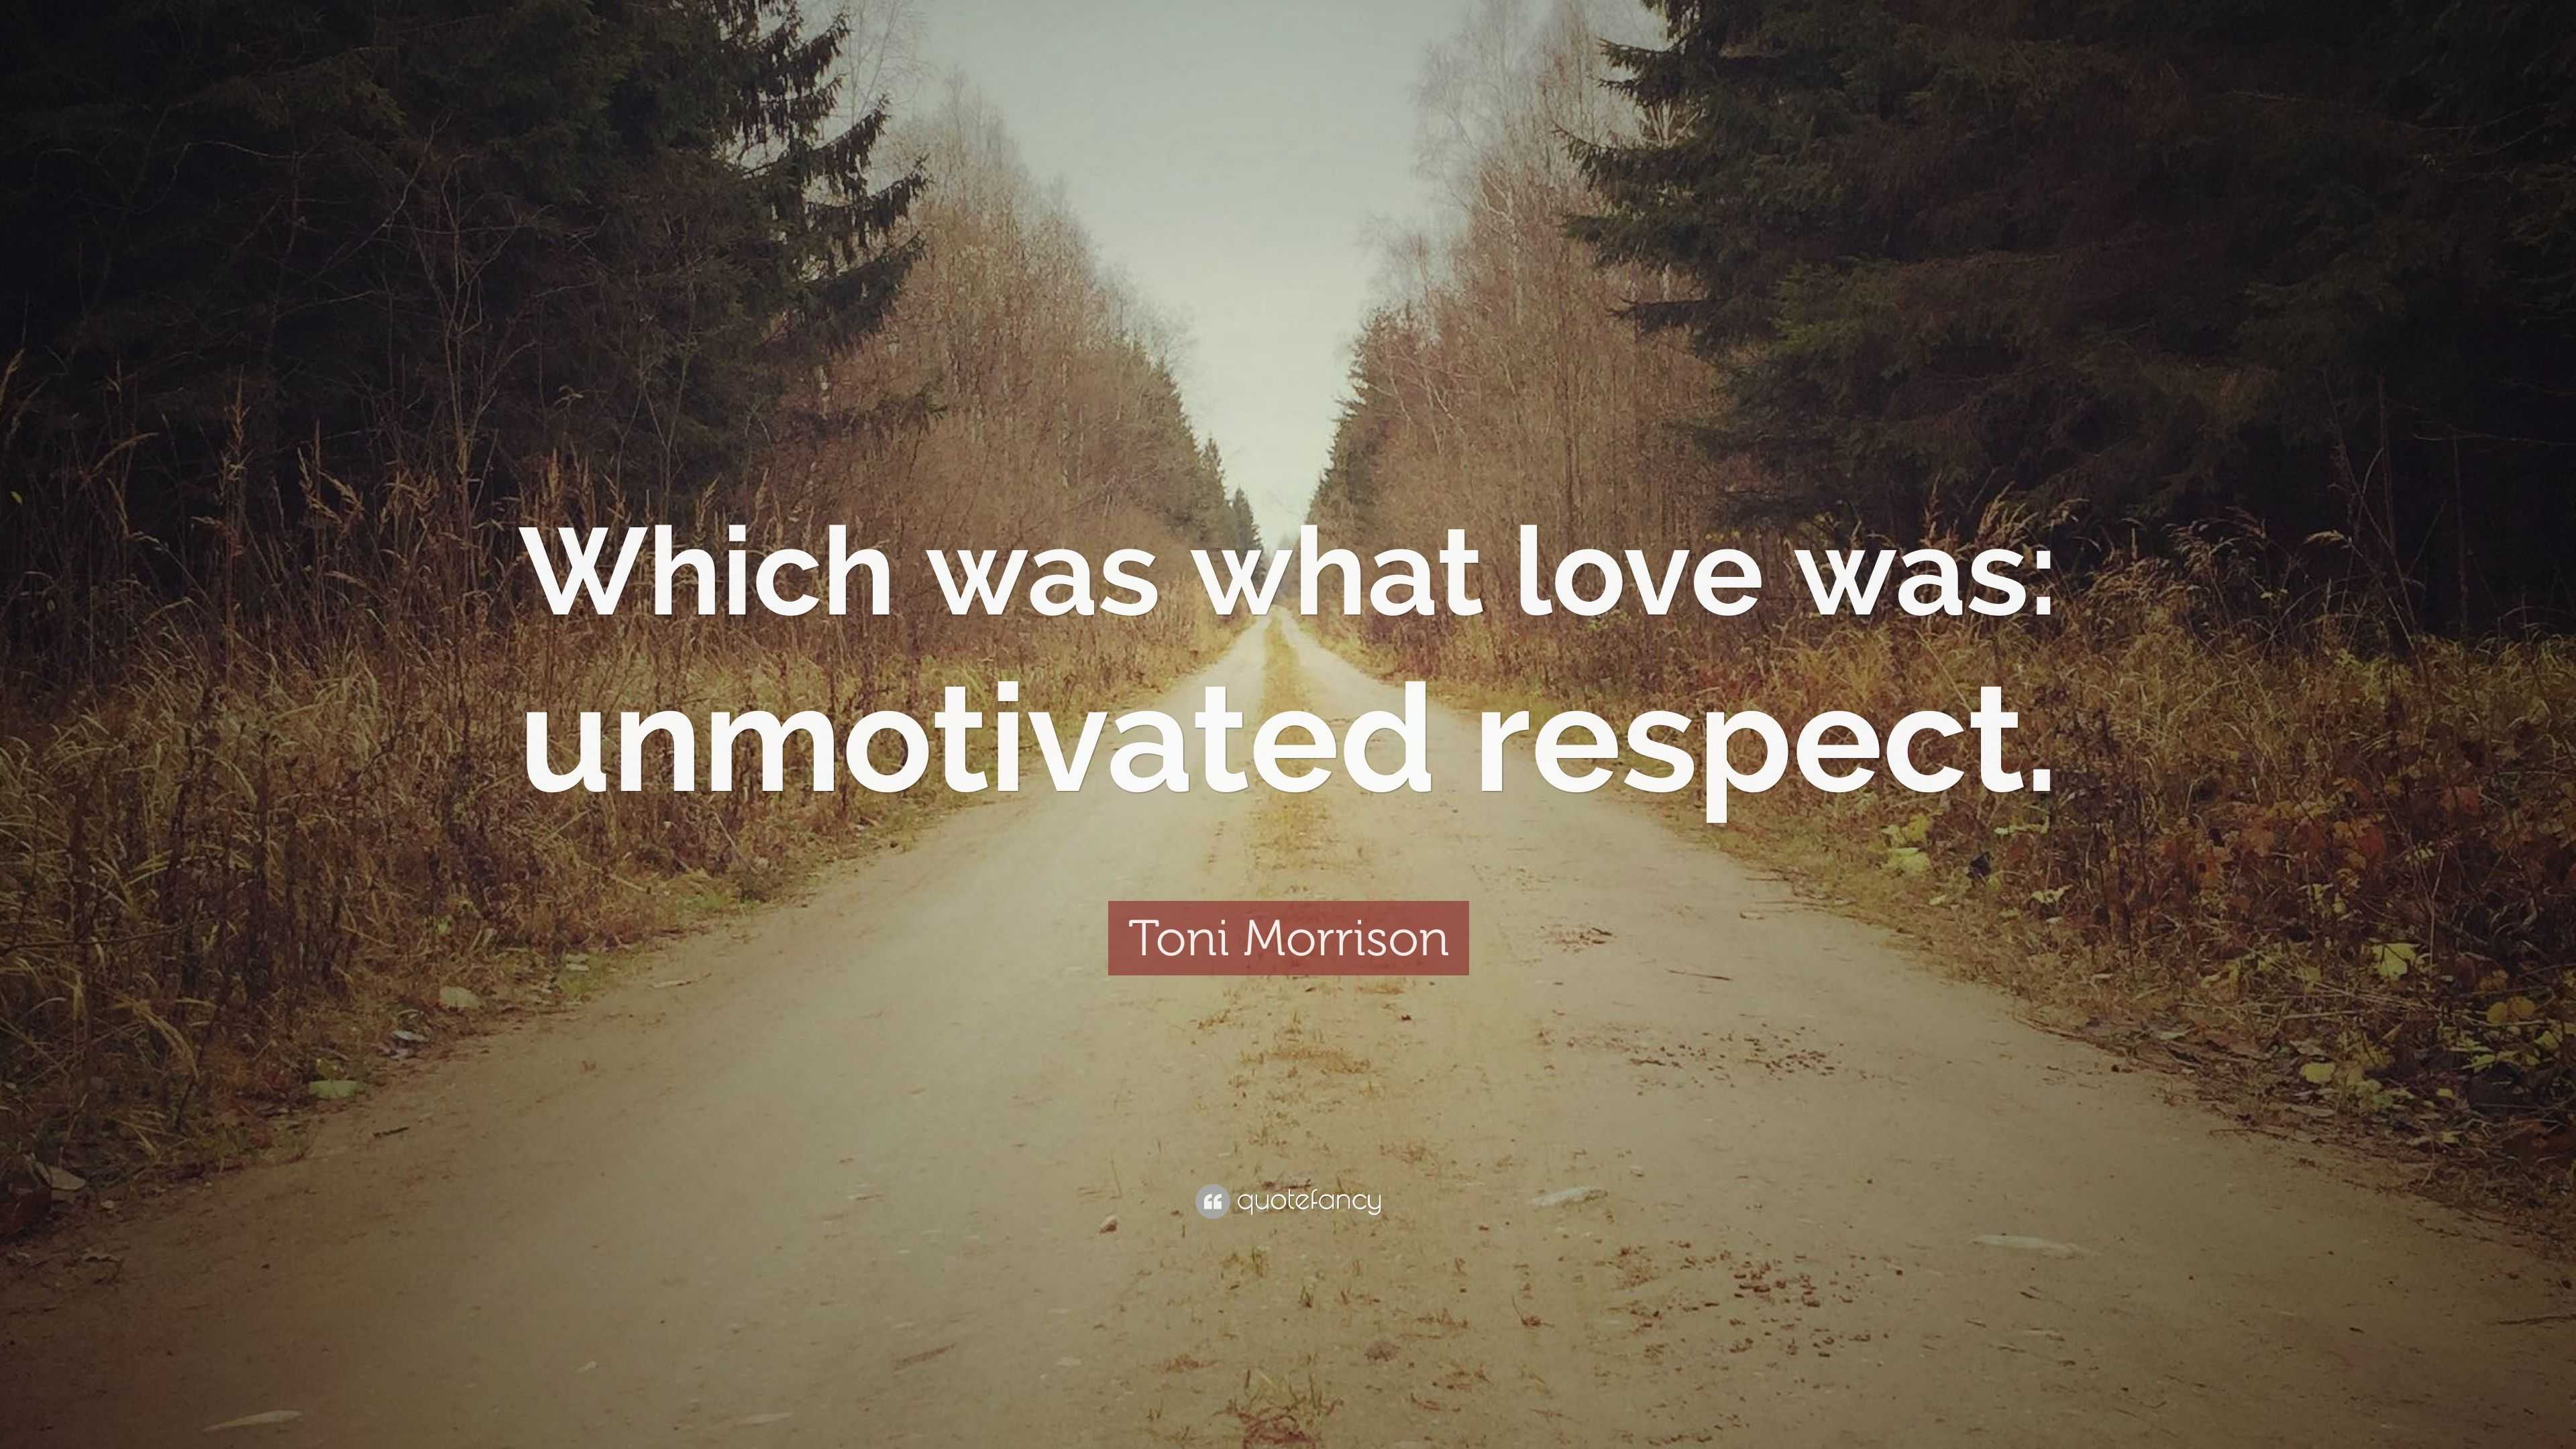 Toni Morrison Quote: "Which was what love was: unmotivated respect."